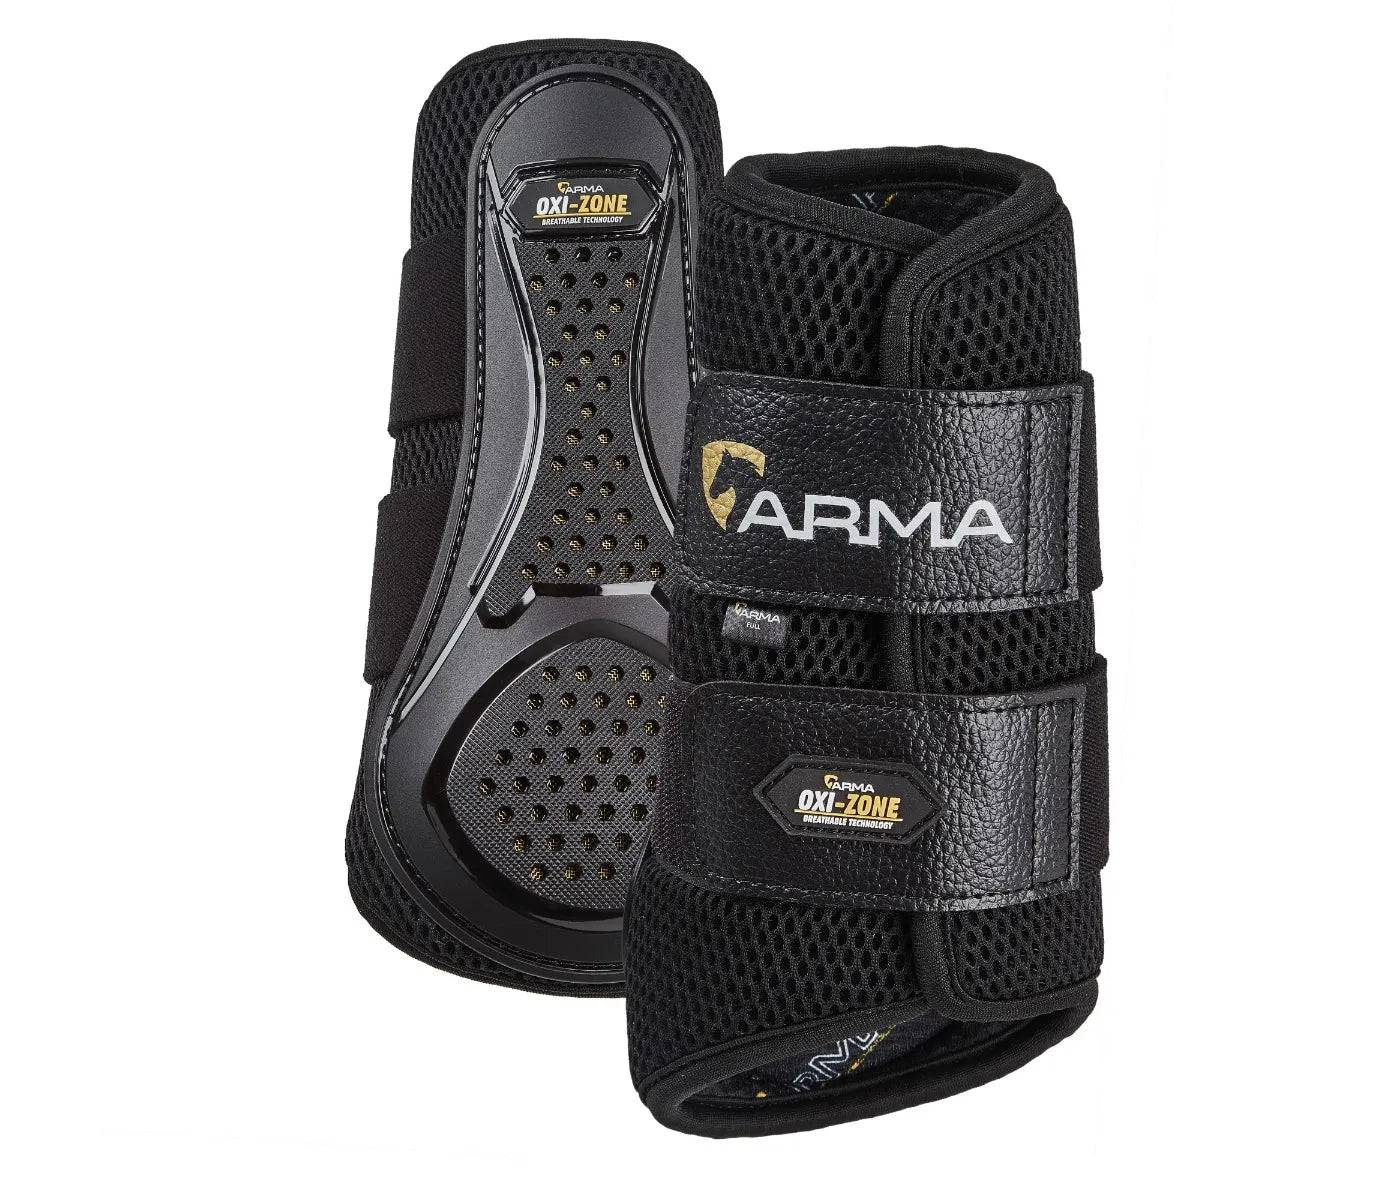 Arma Oxi-Zone Carbon Brushing Boots - pr - Equine Exchange Tack Shop